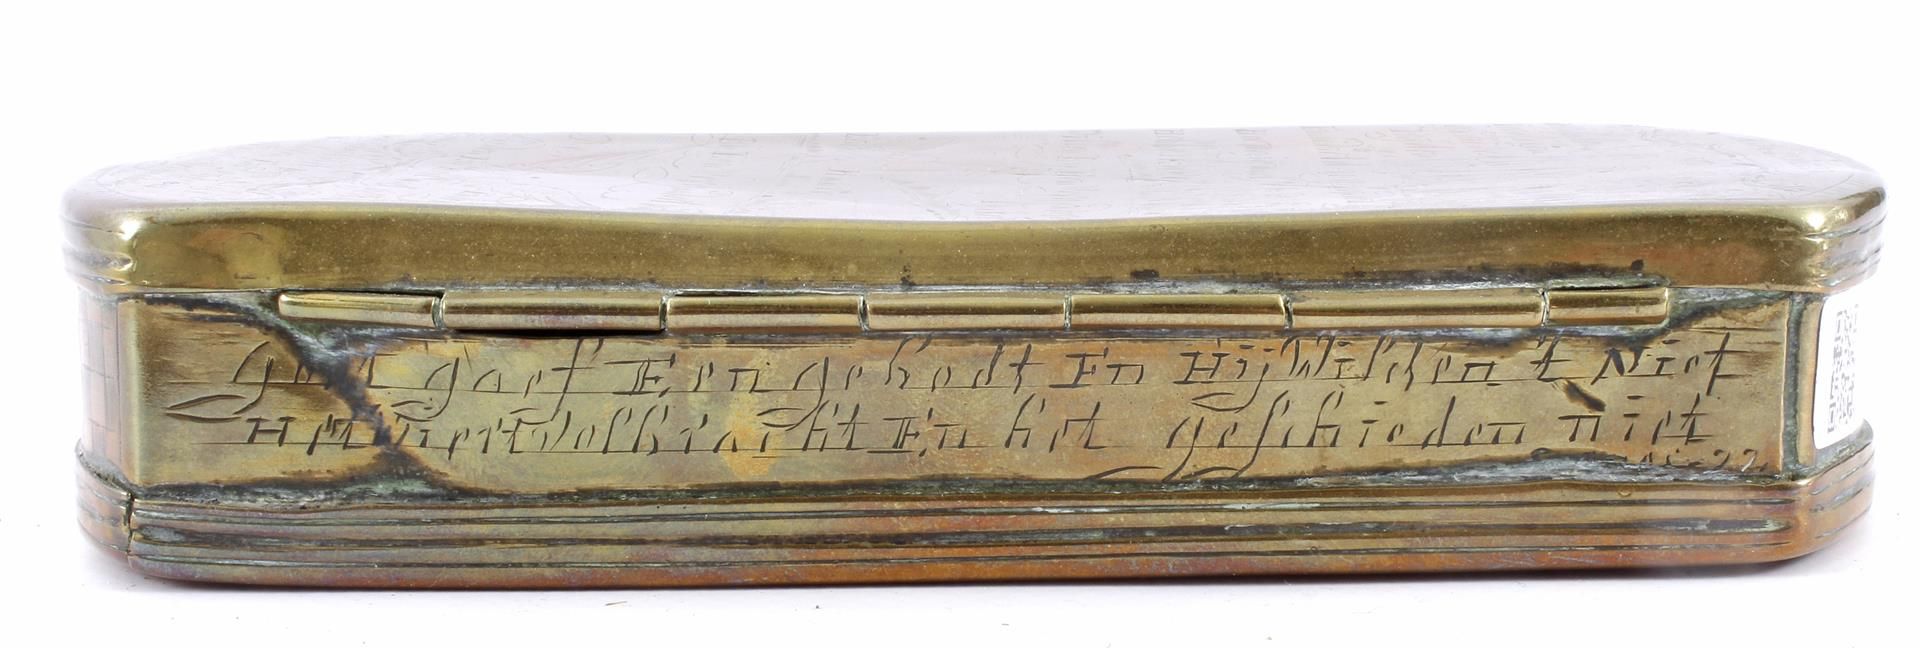 Copper 18th century tobacco box with etched decor and text Matthew 23 verse 37, 3 cm high, 15.7x8 - Image 3 of 4